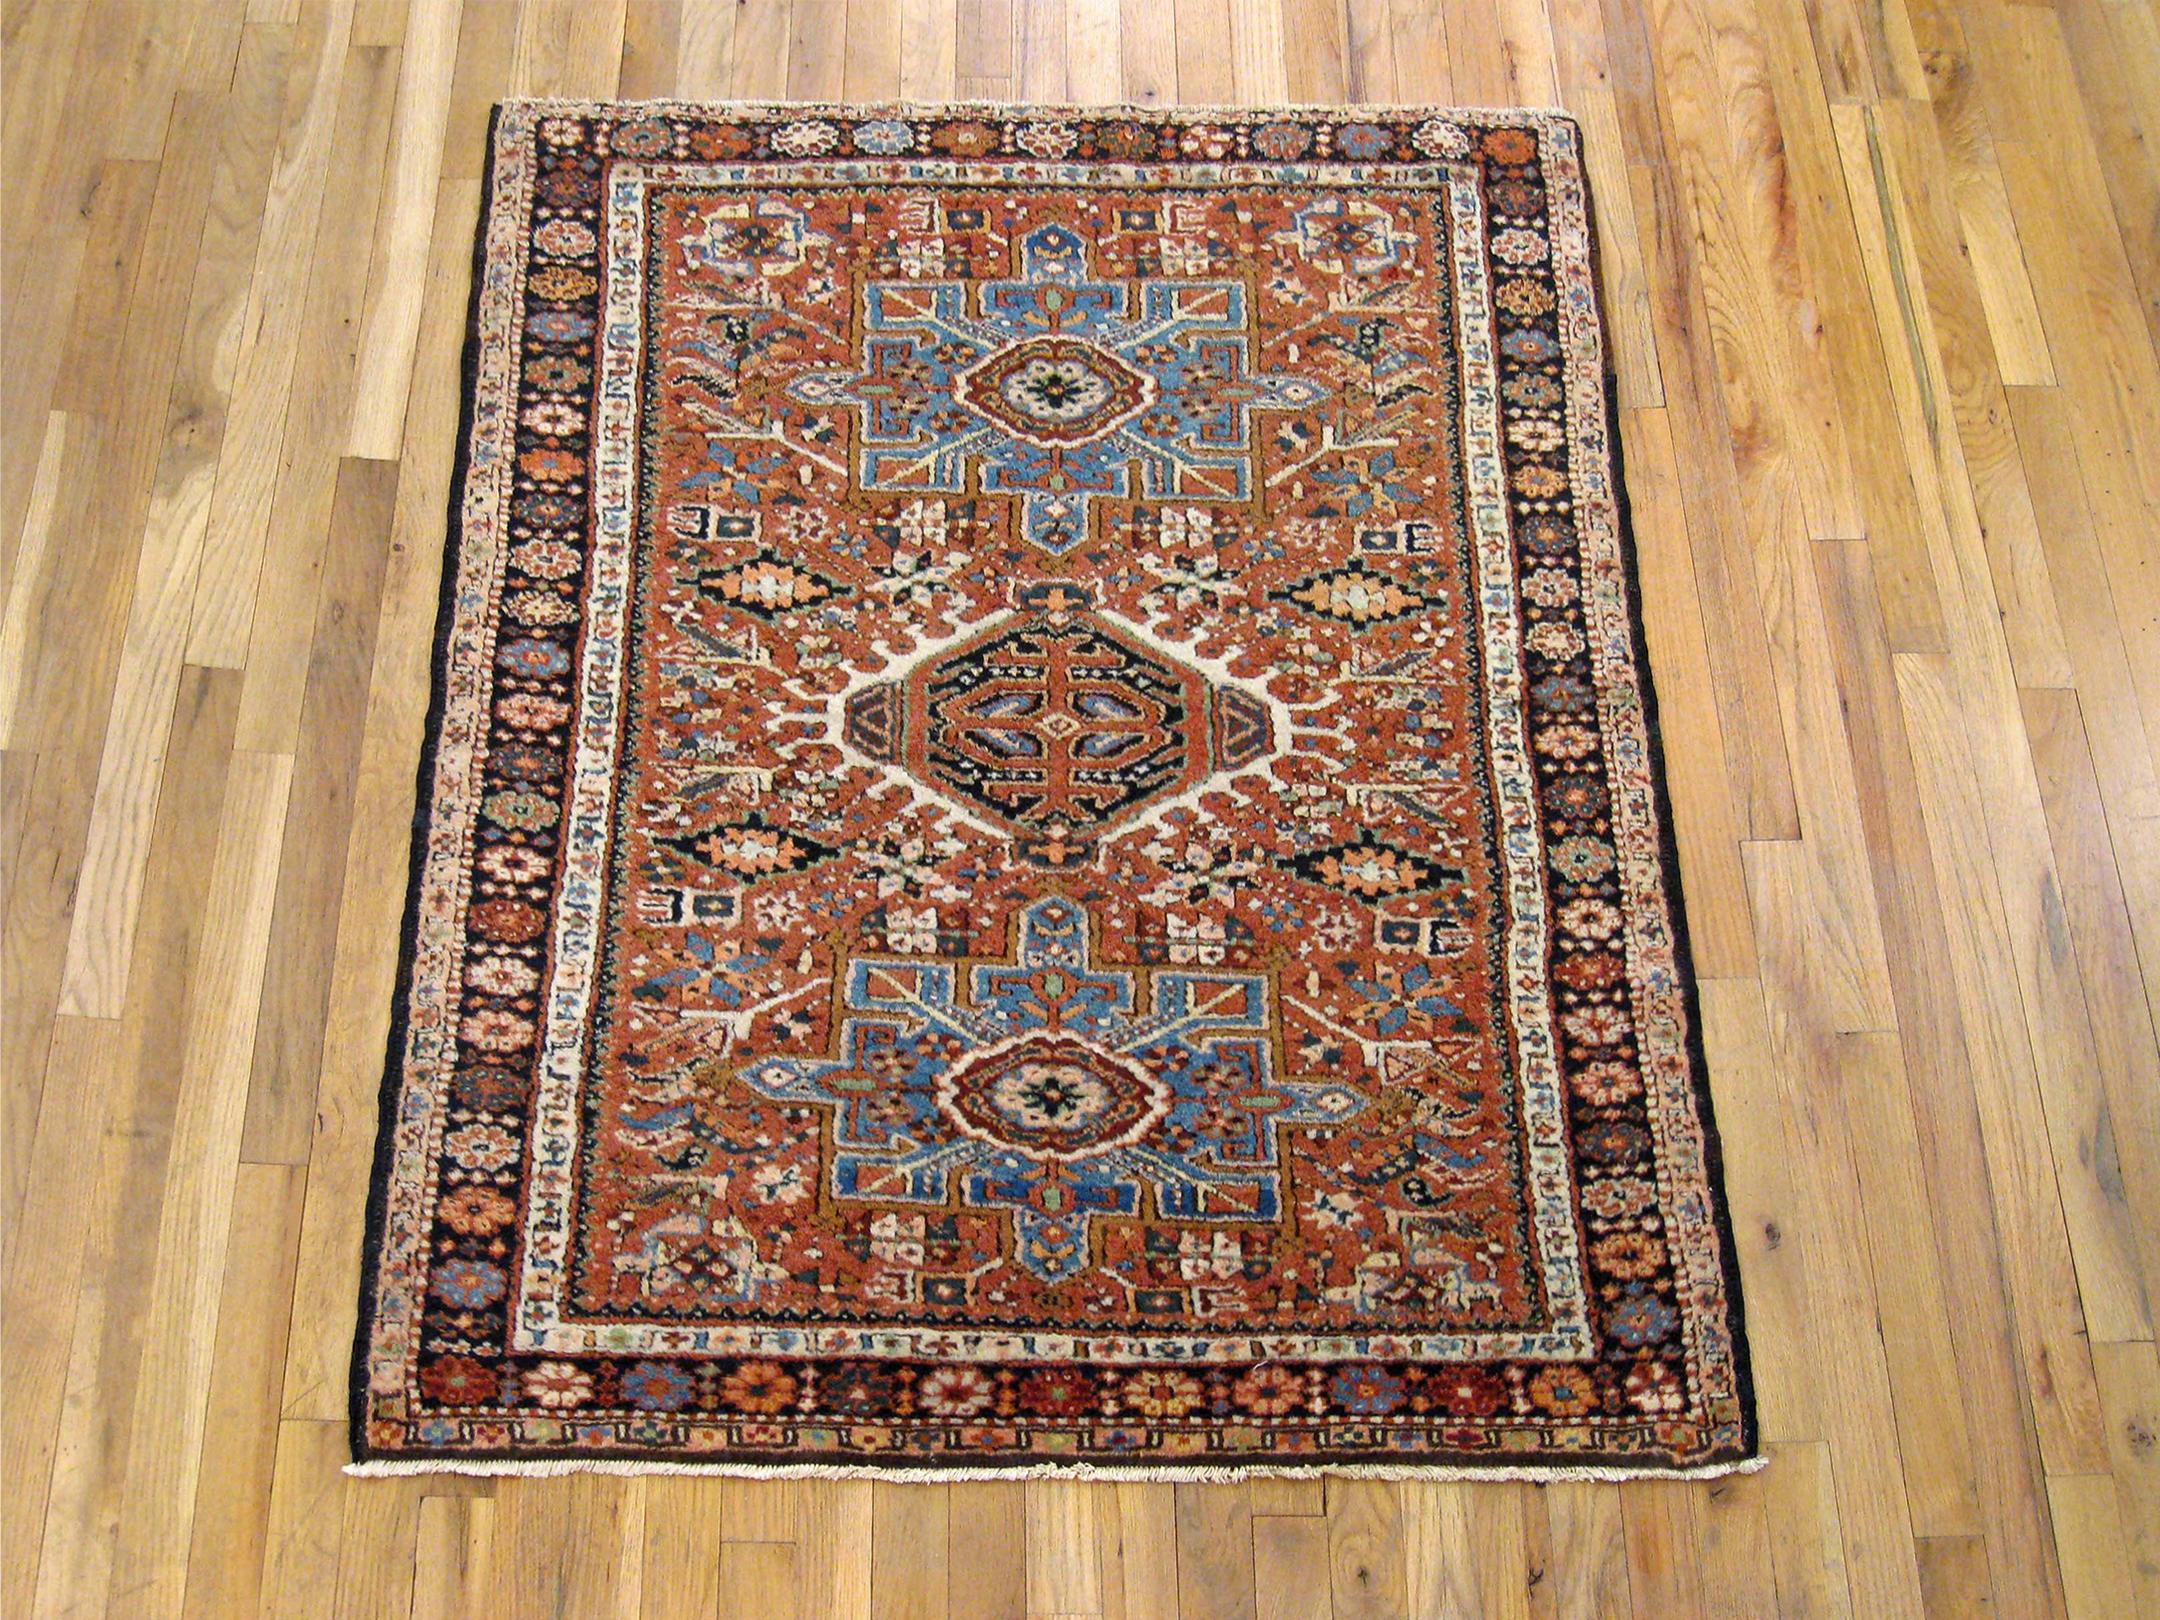 An antique Persian Heriz Karaja oriental rug, size 4'4 x 3'7, circa 1920. This handsome handwoven geometric rug features multiple medallions in the Classic red primary field. The central field is enclosed within a slim outer border in navy tones